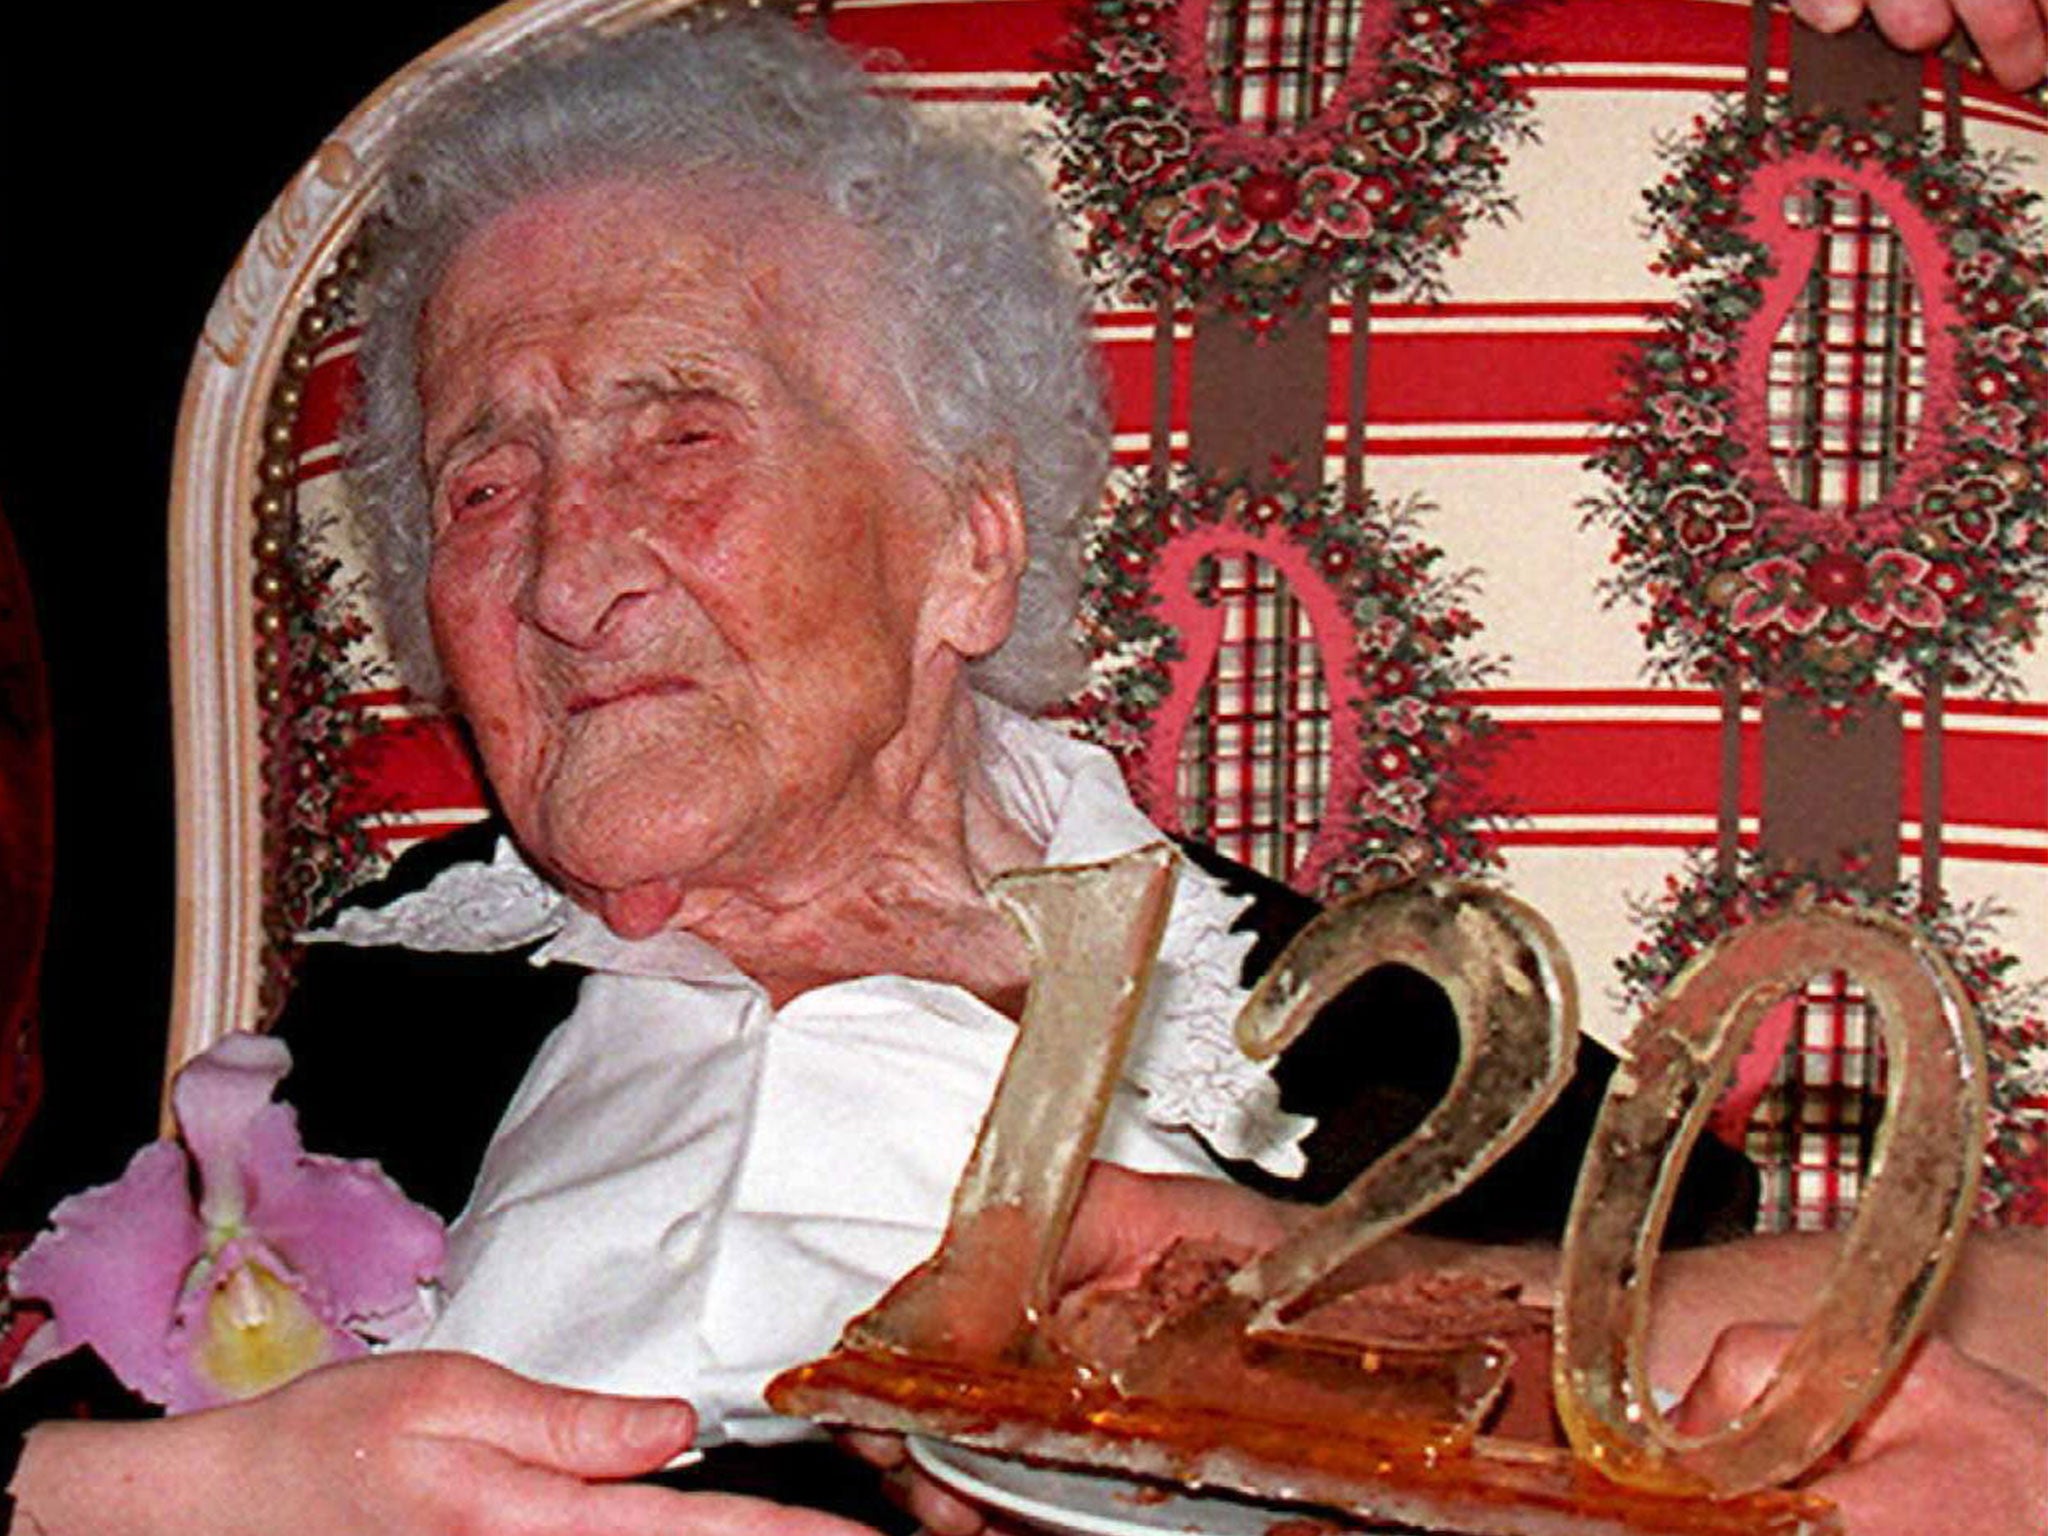 Jeanne Calment is widely recognised as the longest-lived person in recorded human history